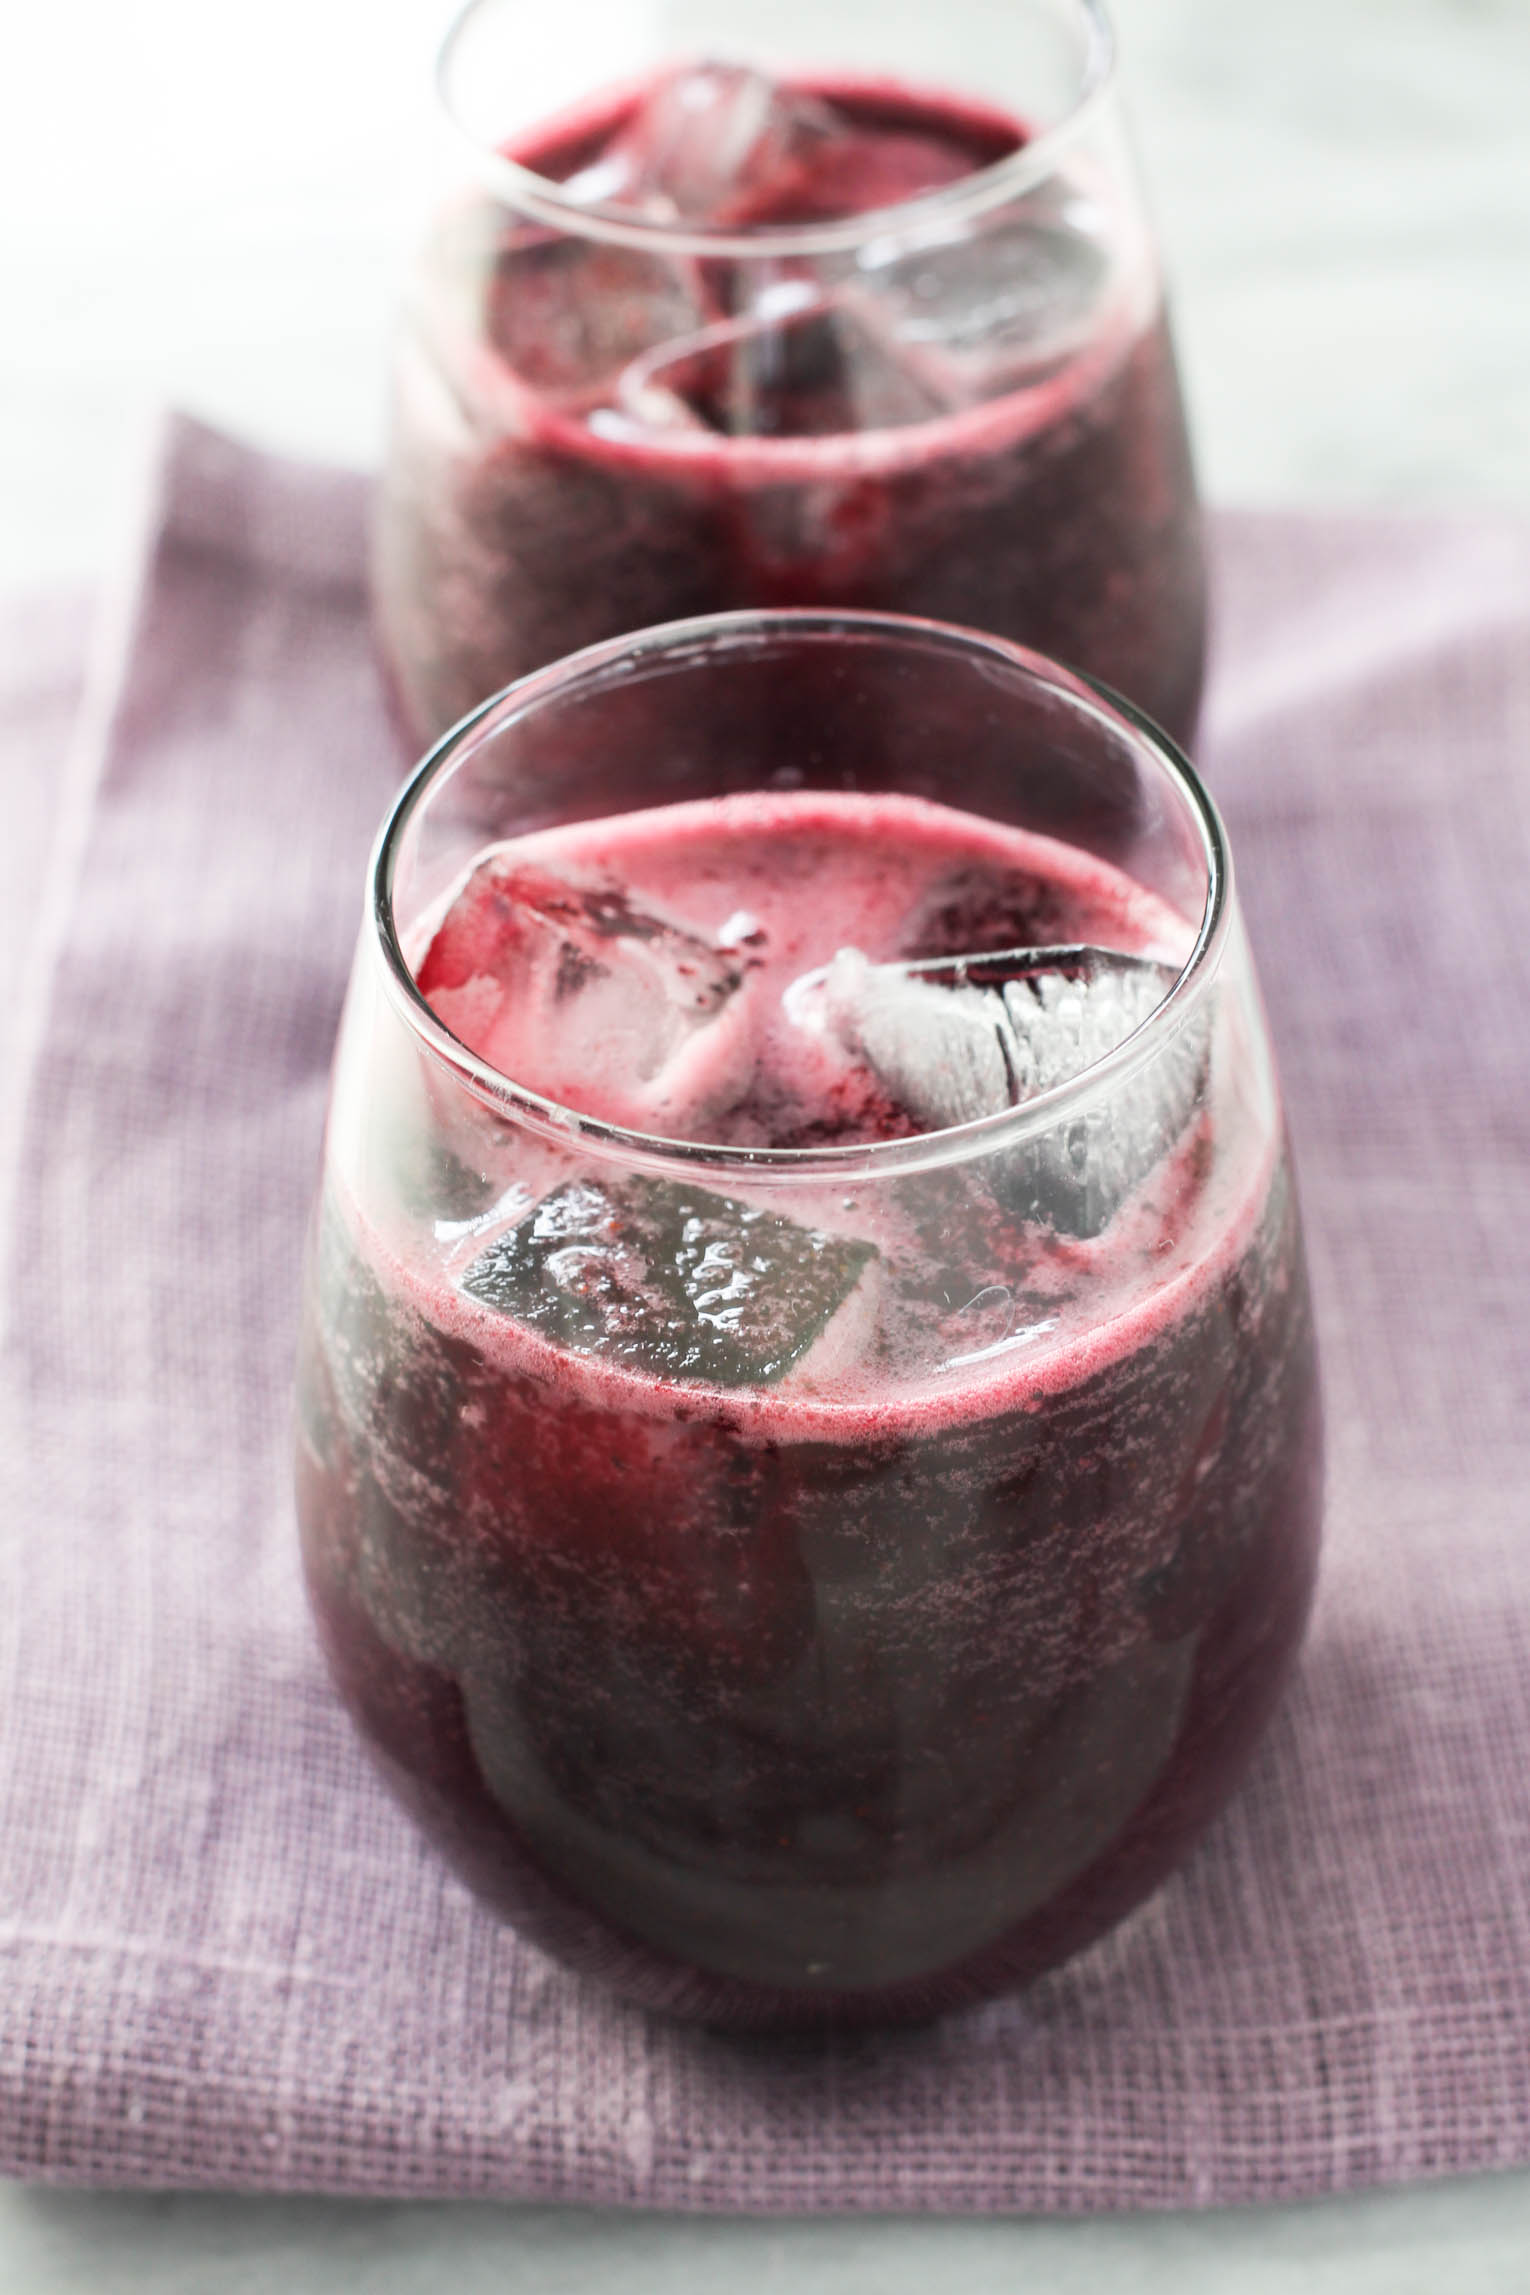 A glass with blueberry juice and ice standing on purple napkin. There is another glass with blueberry juice in the backgraound.